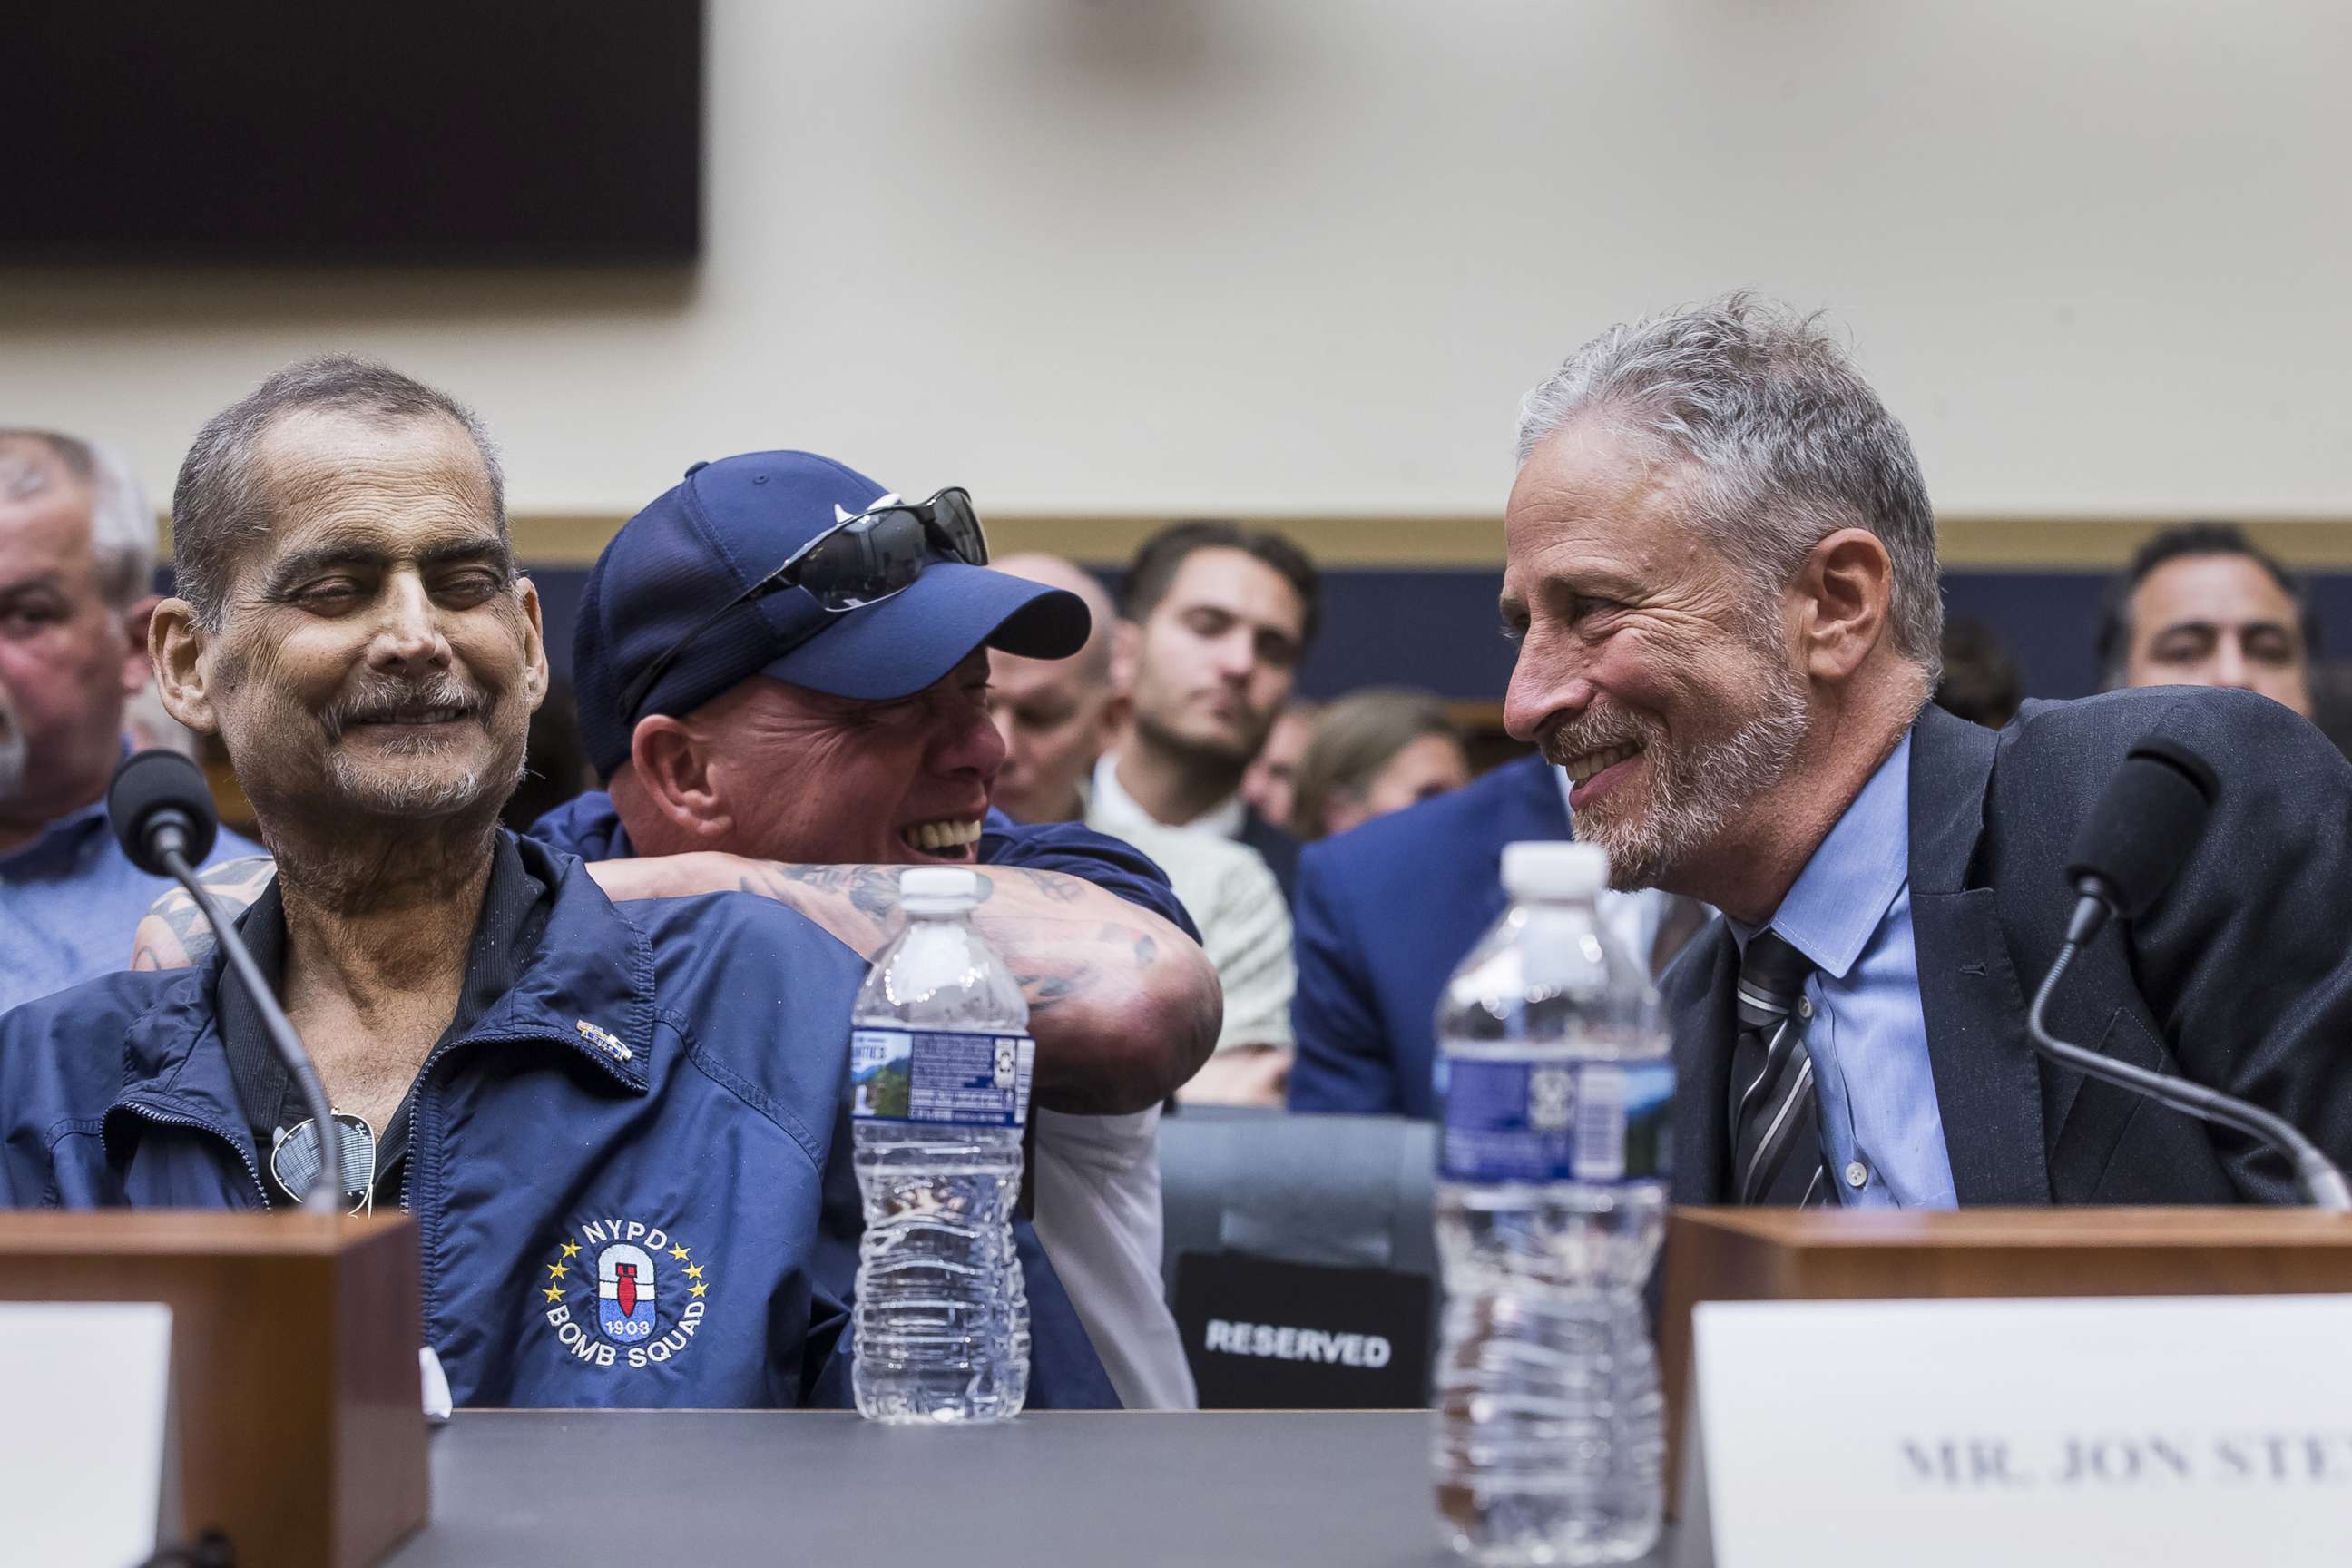 PHOTO: Former Daily show host Jon Stewart, right, speaks to retired police detective and 9/11 responder Luis Alvarez, left, during a hearing on reauthorization of the September 11th Victim Compensation Fund, June 11, 2019, in Washington, D.C.